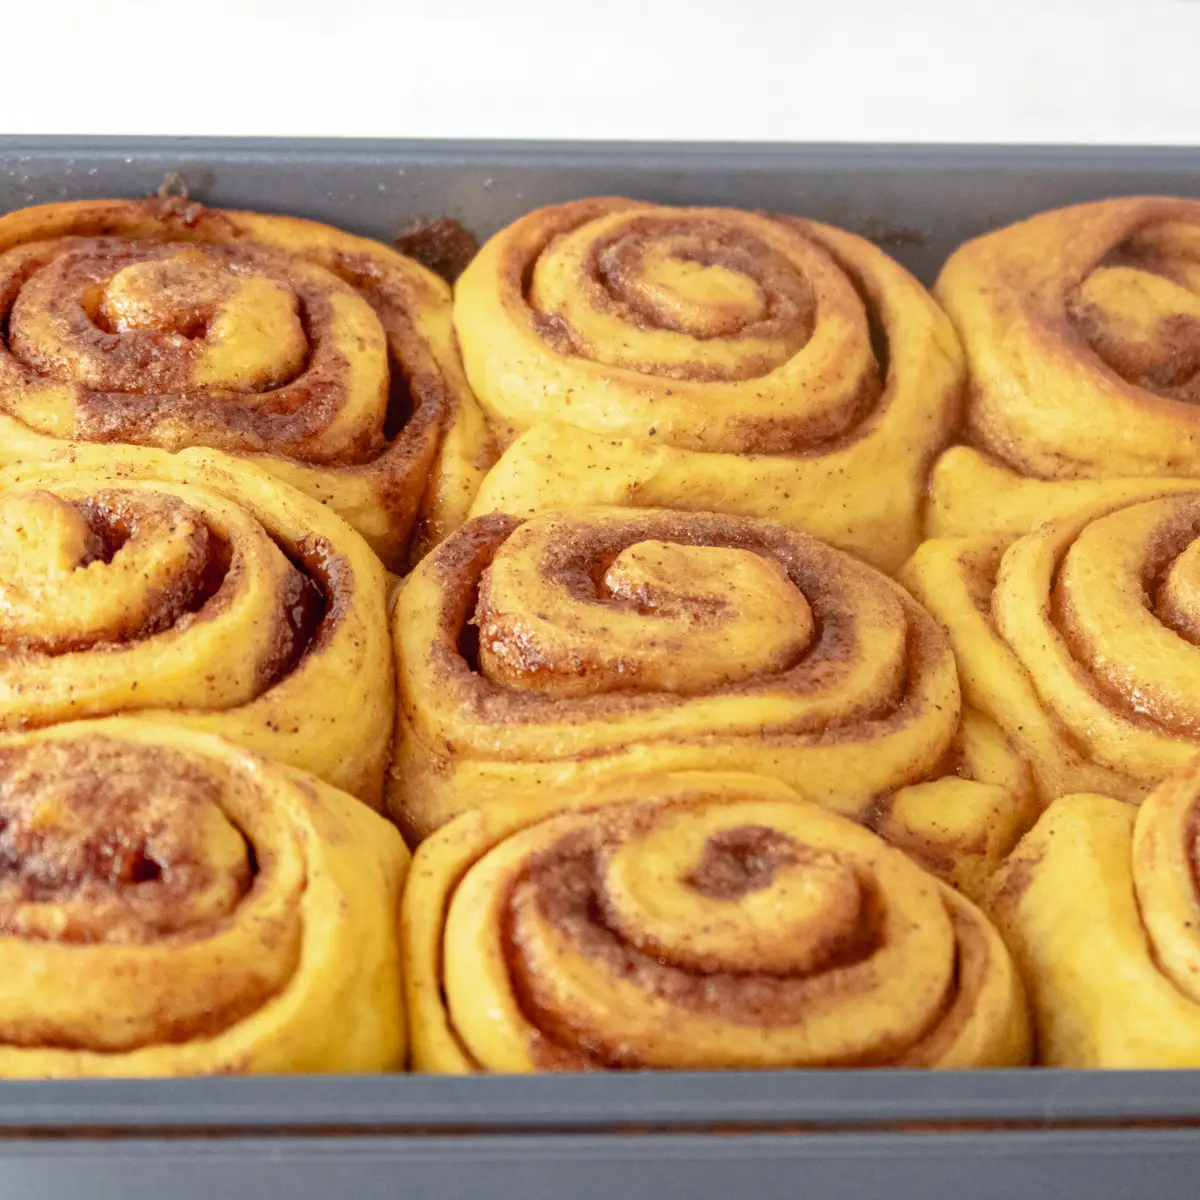 Vegan pumpkin cinnamon rolls fresh out of the oven before the drizzle.